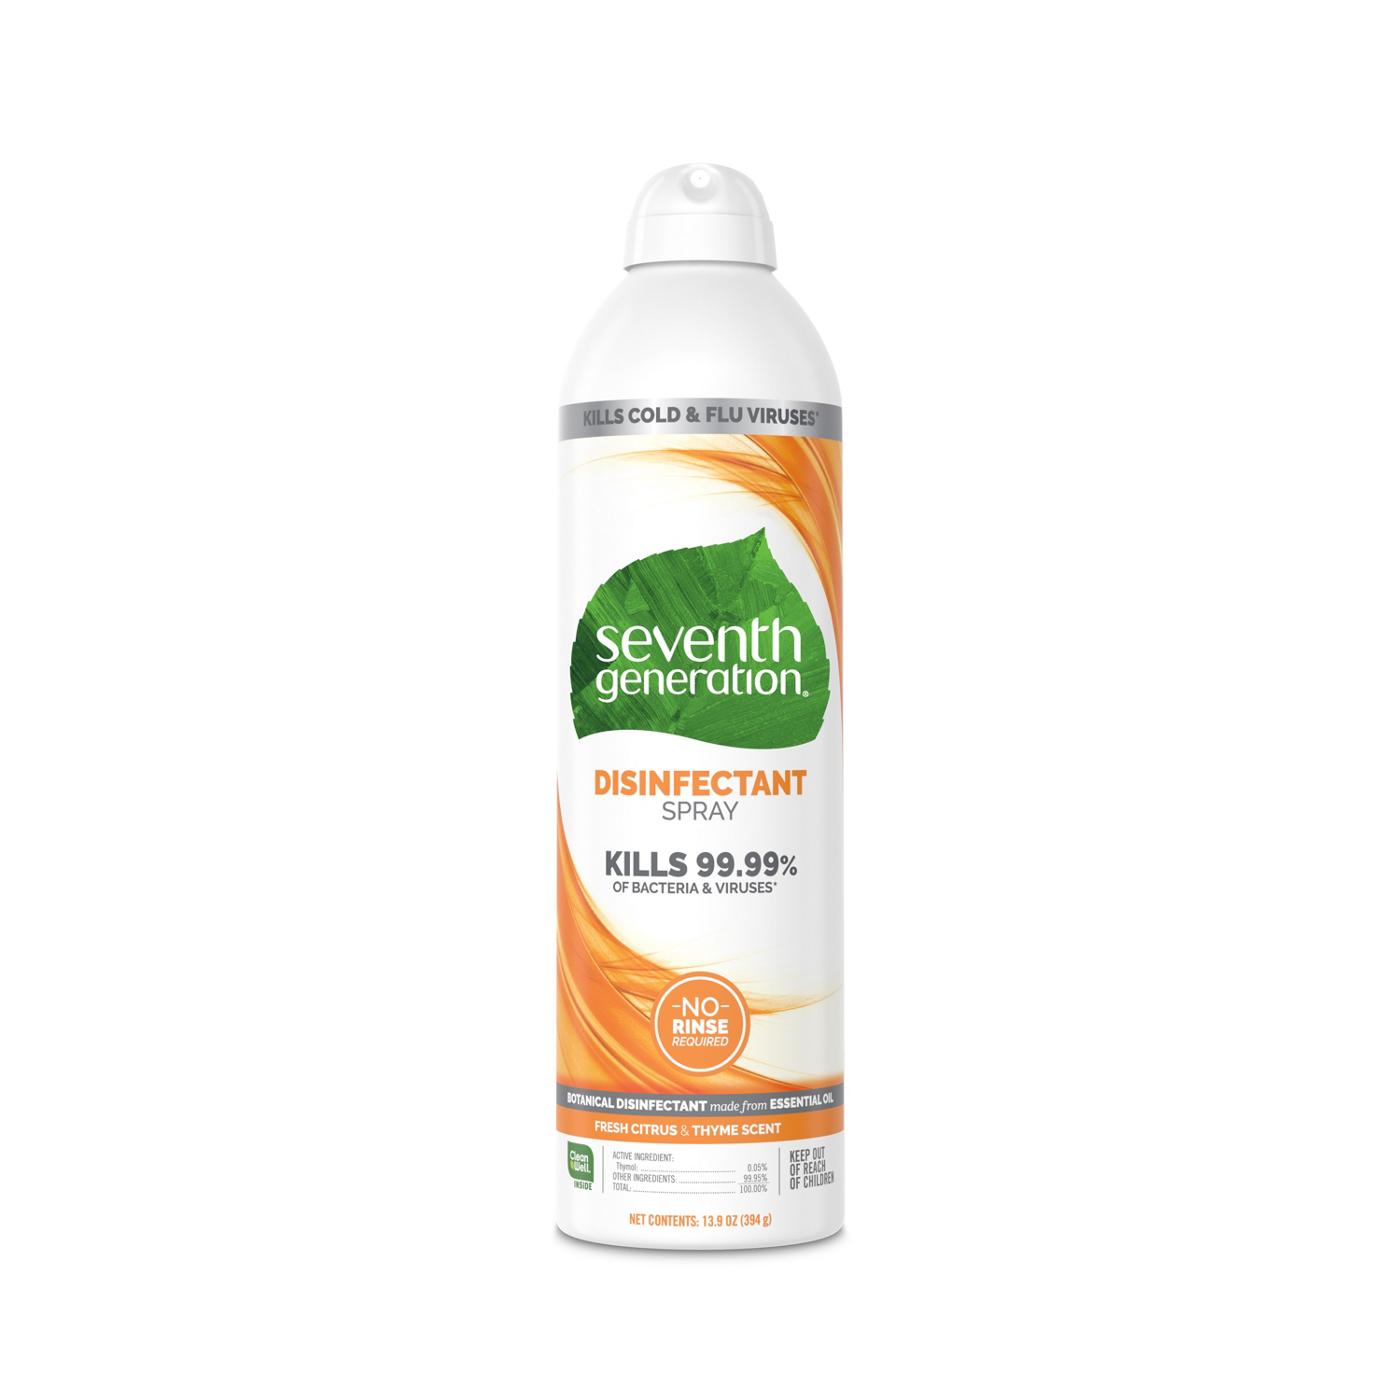 Seventh Generation Fresh Citrus and Thyme Disinfectant Spray; image 1 of 10